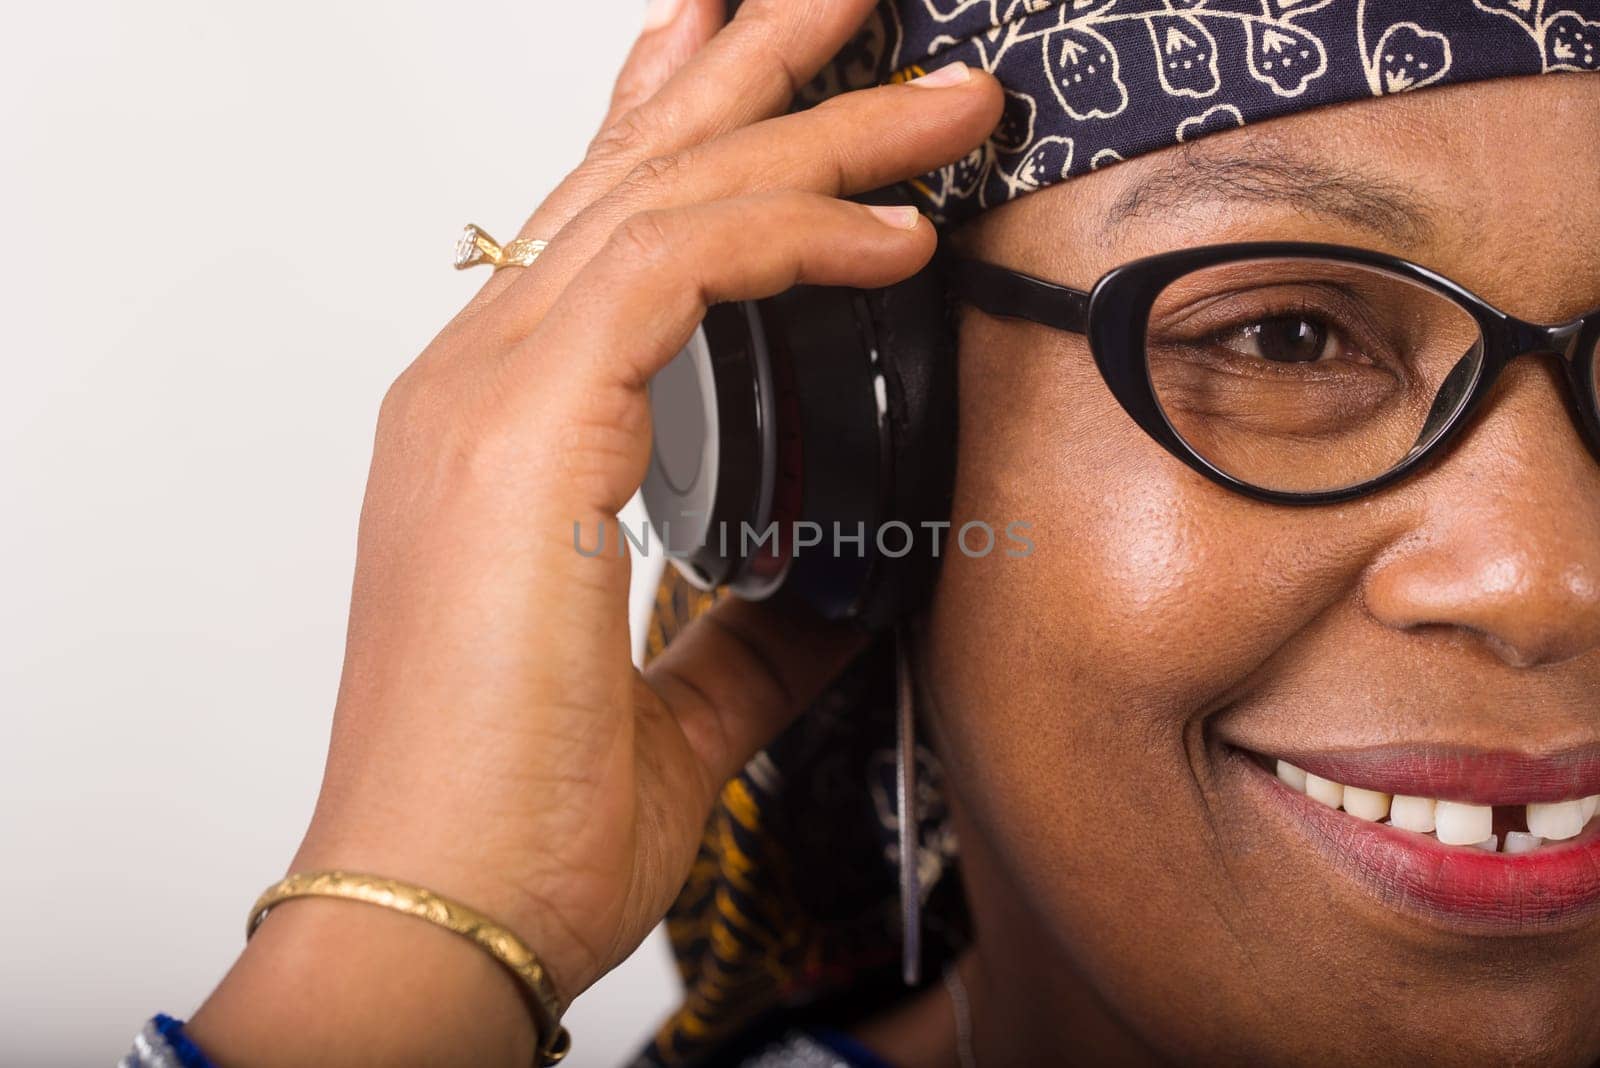 mature woman standing on white background listening to music using headphones while smiling.